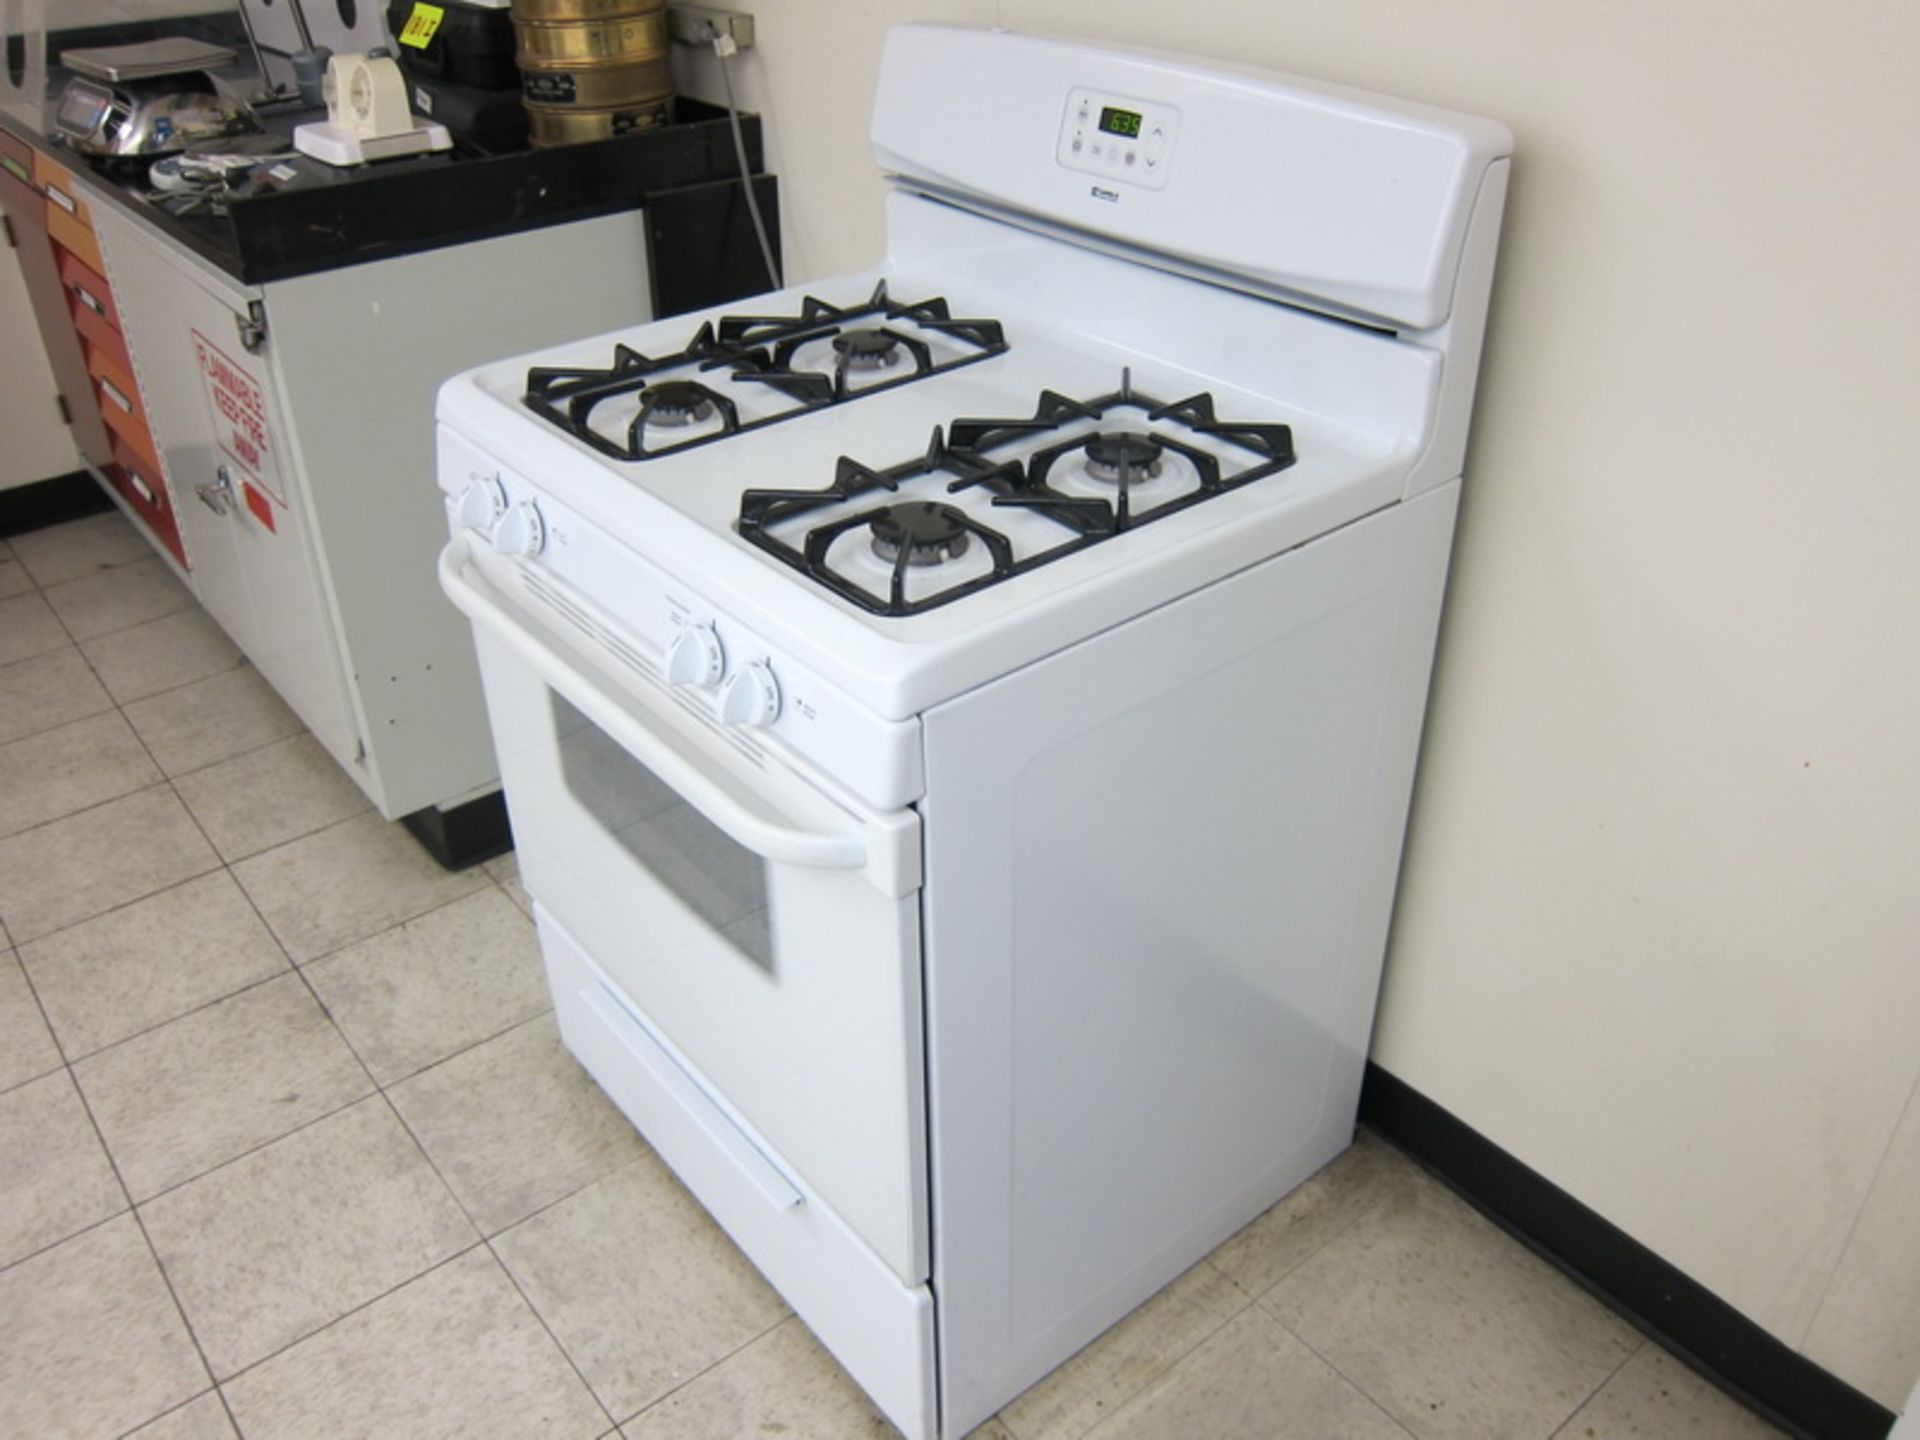 [Lot] Kenmore stove, model 790.714526, s/n VF70316988, Four burner gas stove, with bottom broiler,